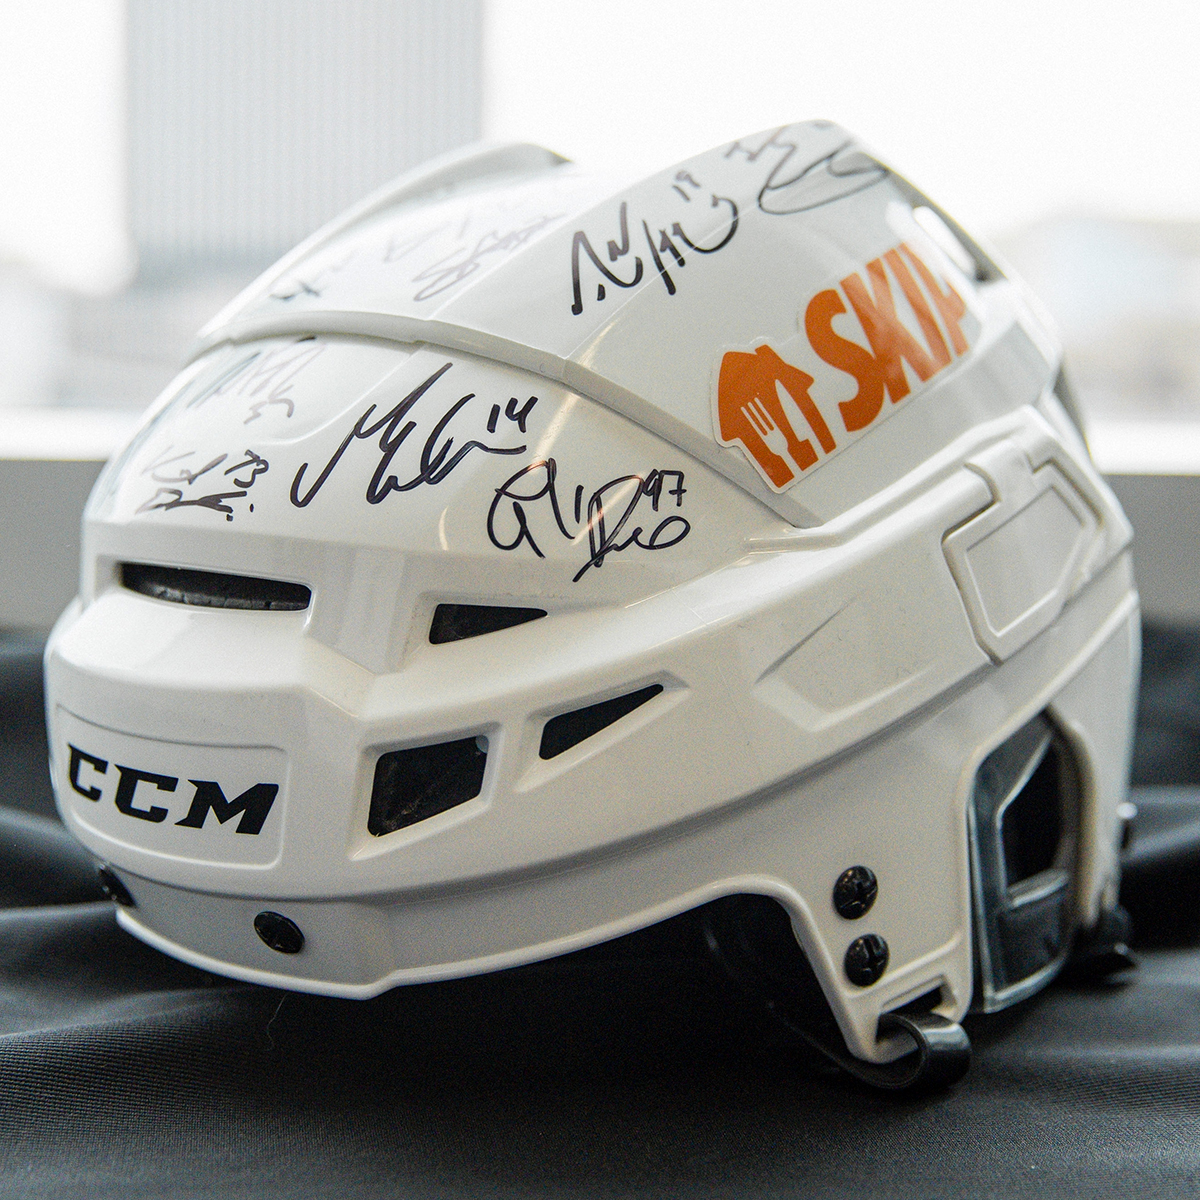 You only have a few days left to sign up for #Oilers LOILTY Rewards & enter to win a team-signed helmet courtesy @SkipTheDishes! Register for this FREE program at EdmontonOilers.com/LOILTY for your shot at exclusive memorabilia & other rewards.